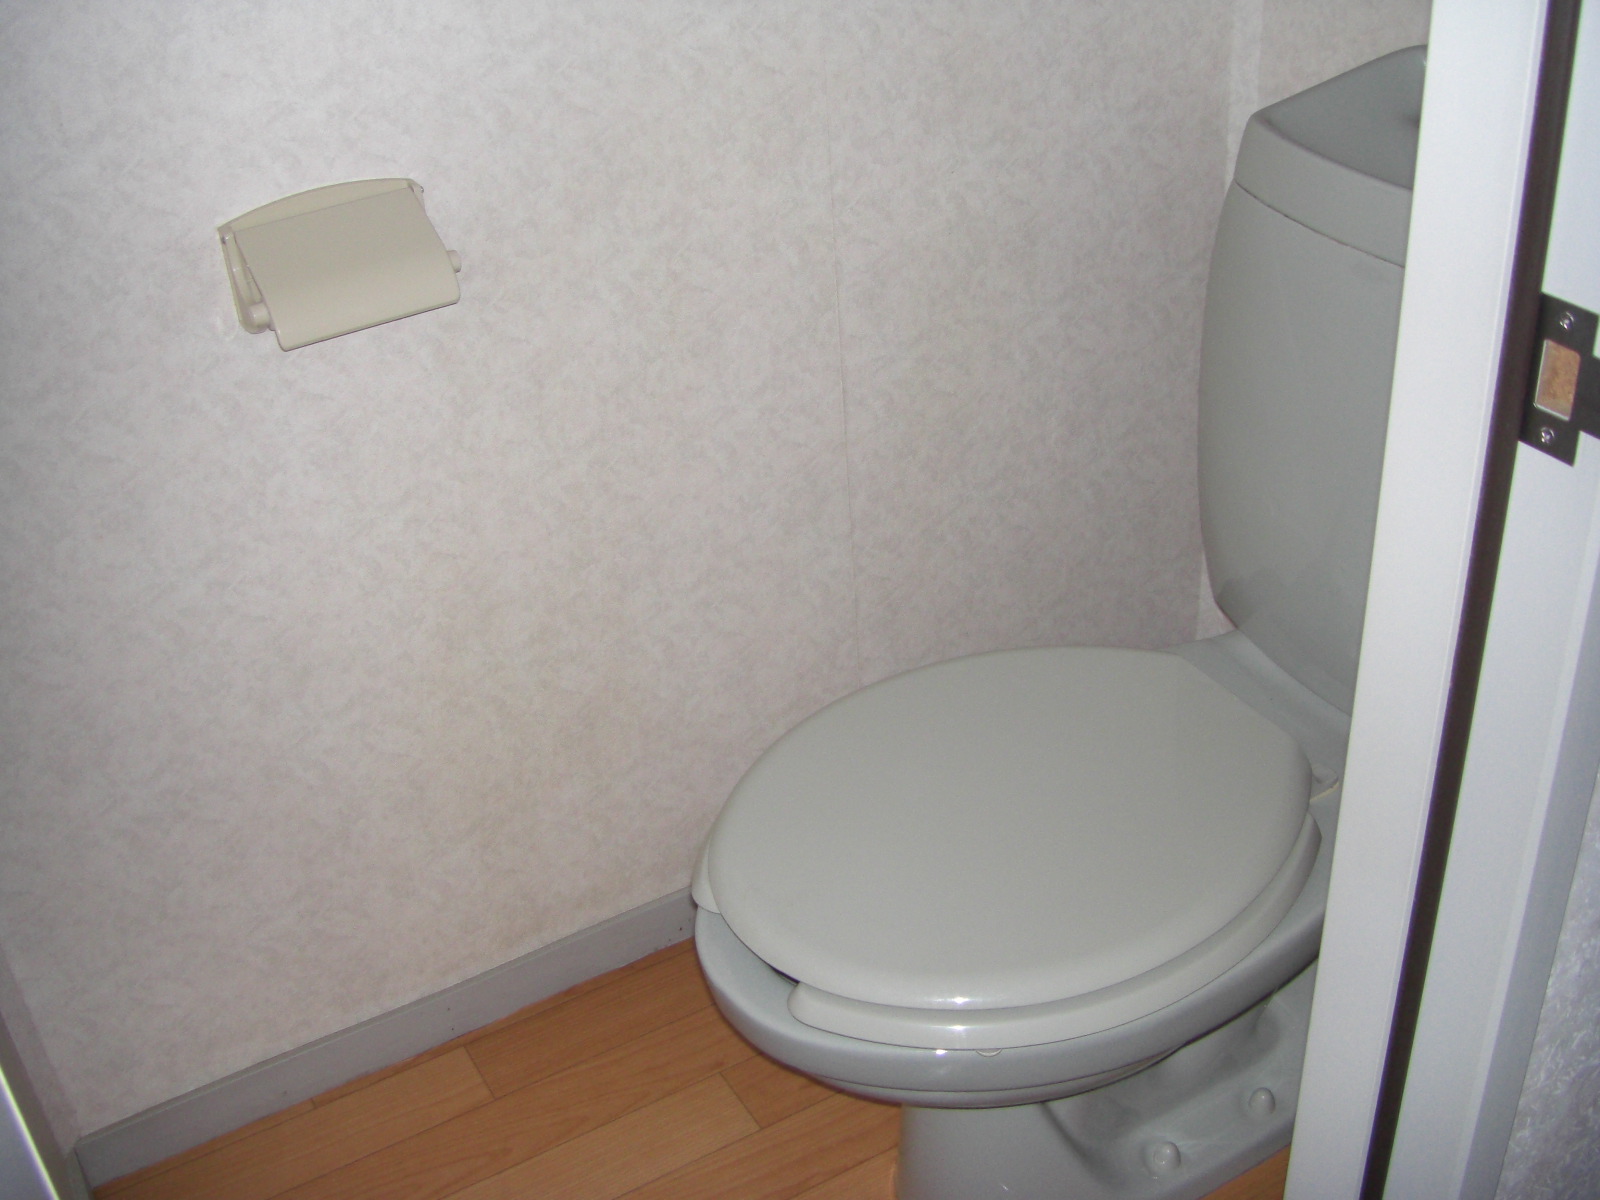 Toilet. Spacious Western-style toilet with cleanliness